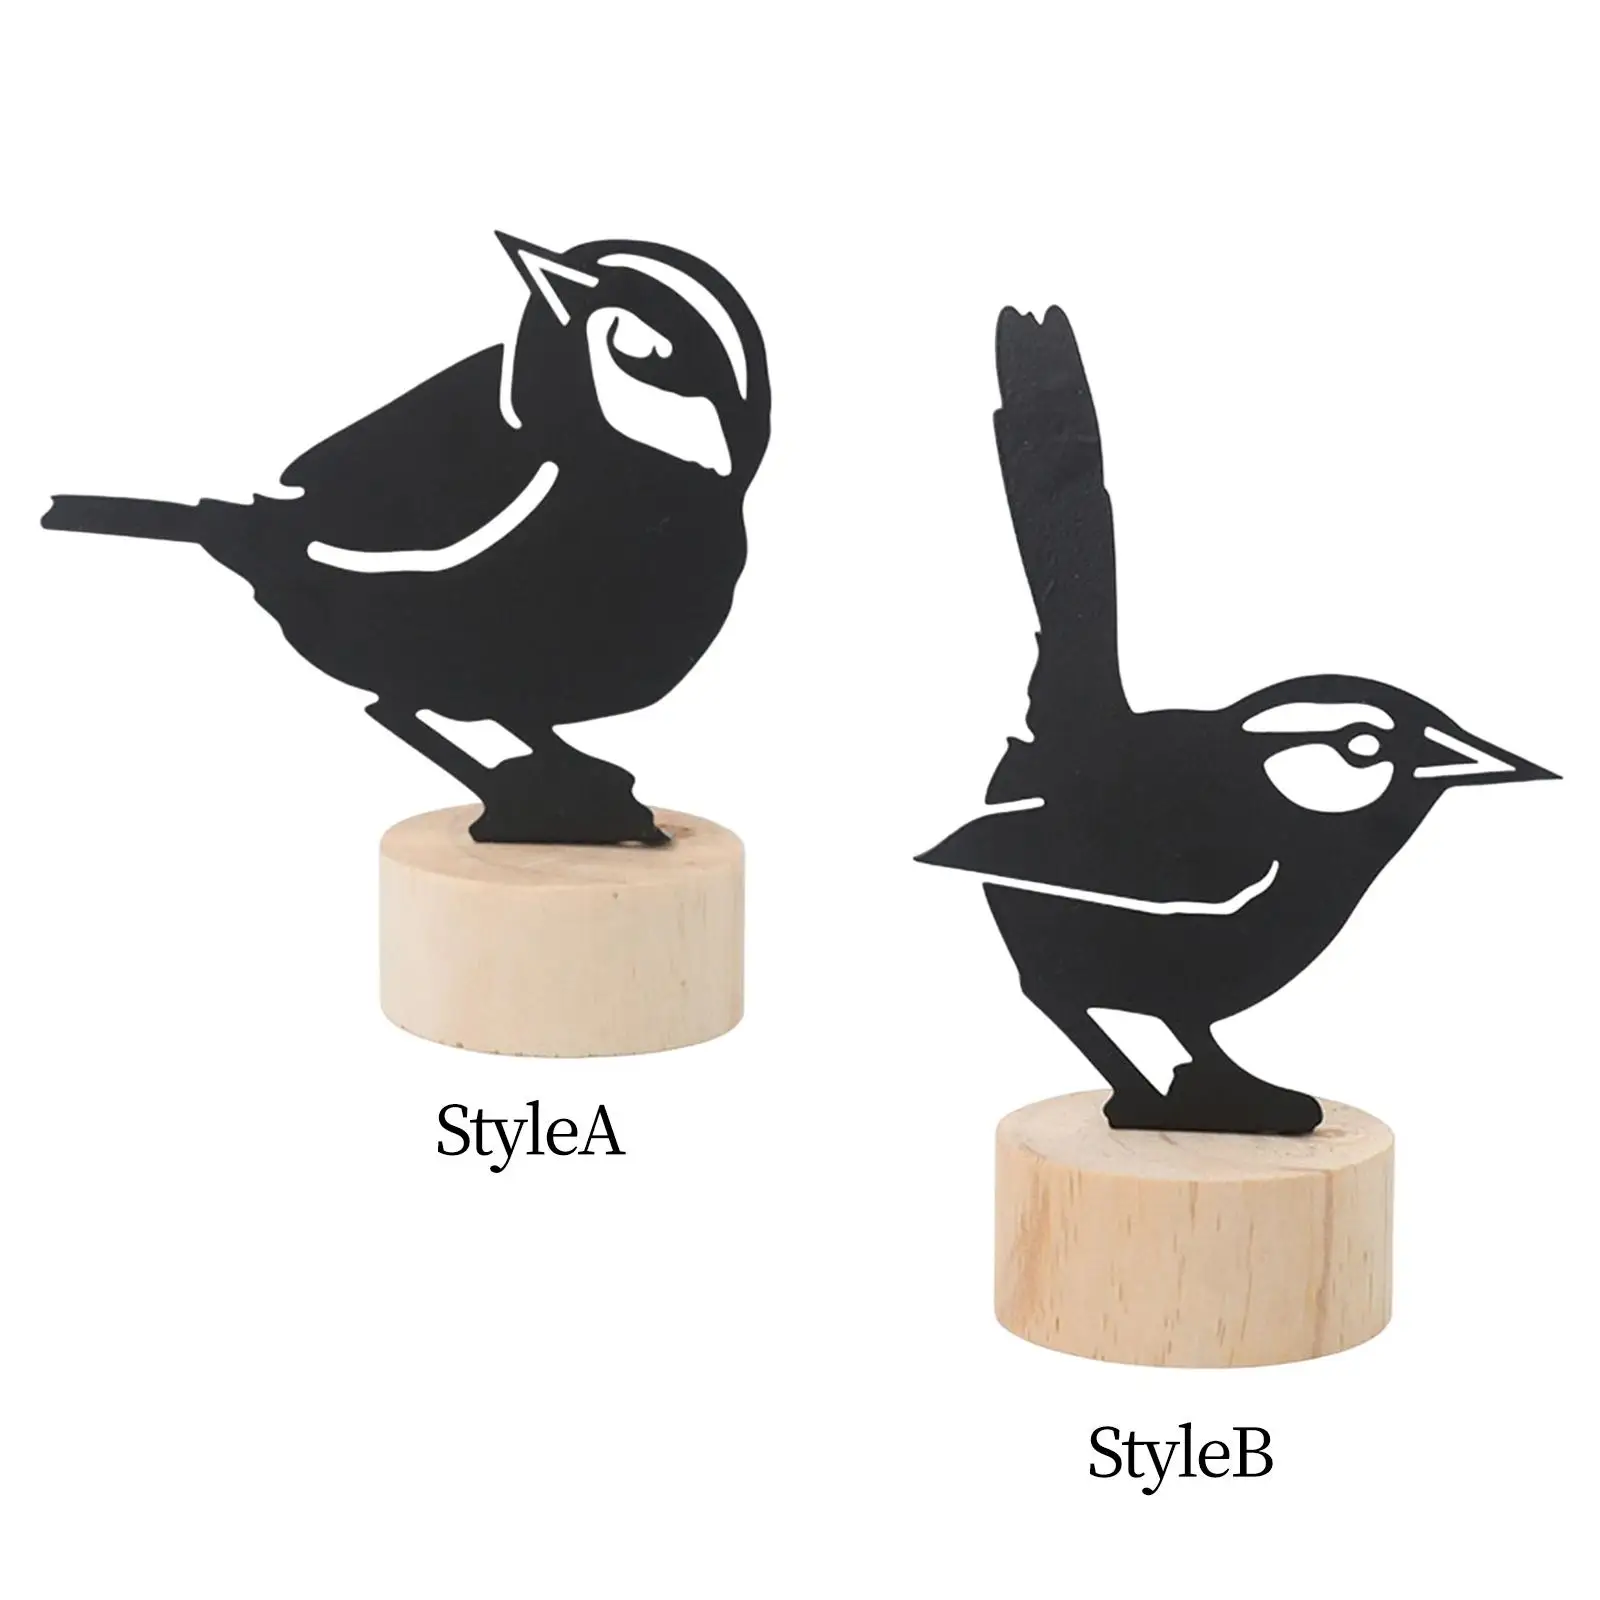 Hollow Bird Silhouettes Table Number Holder Name Card Holder Memo Holder Stand Note Holder Pictures Card Paper Menu Clip